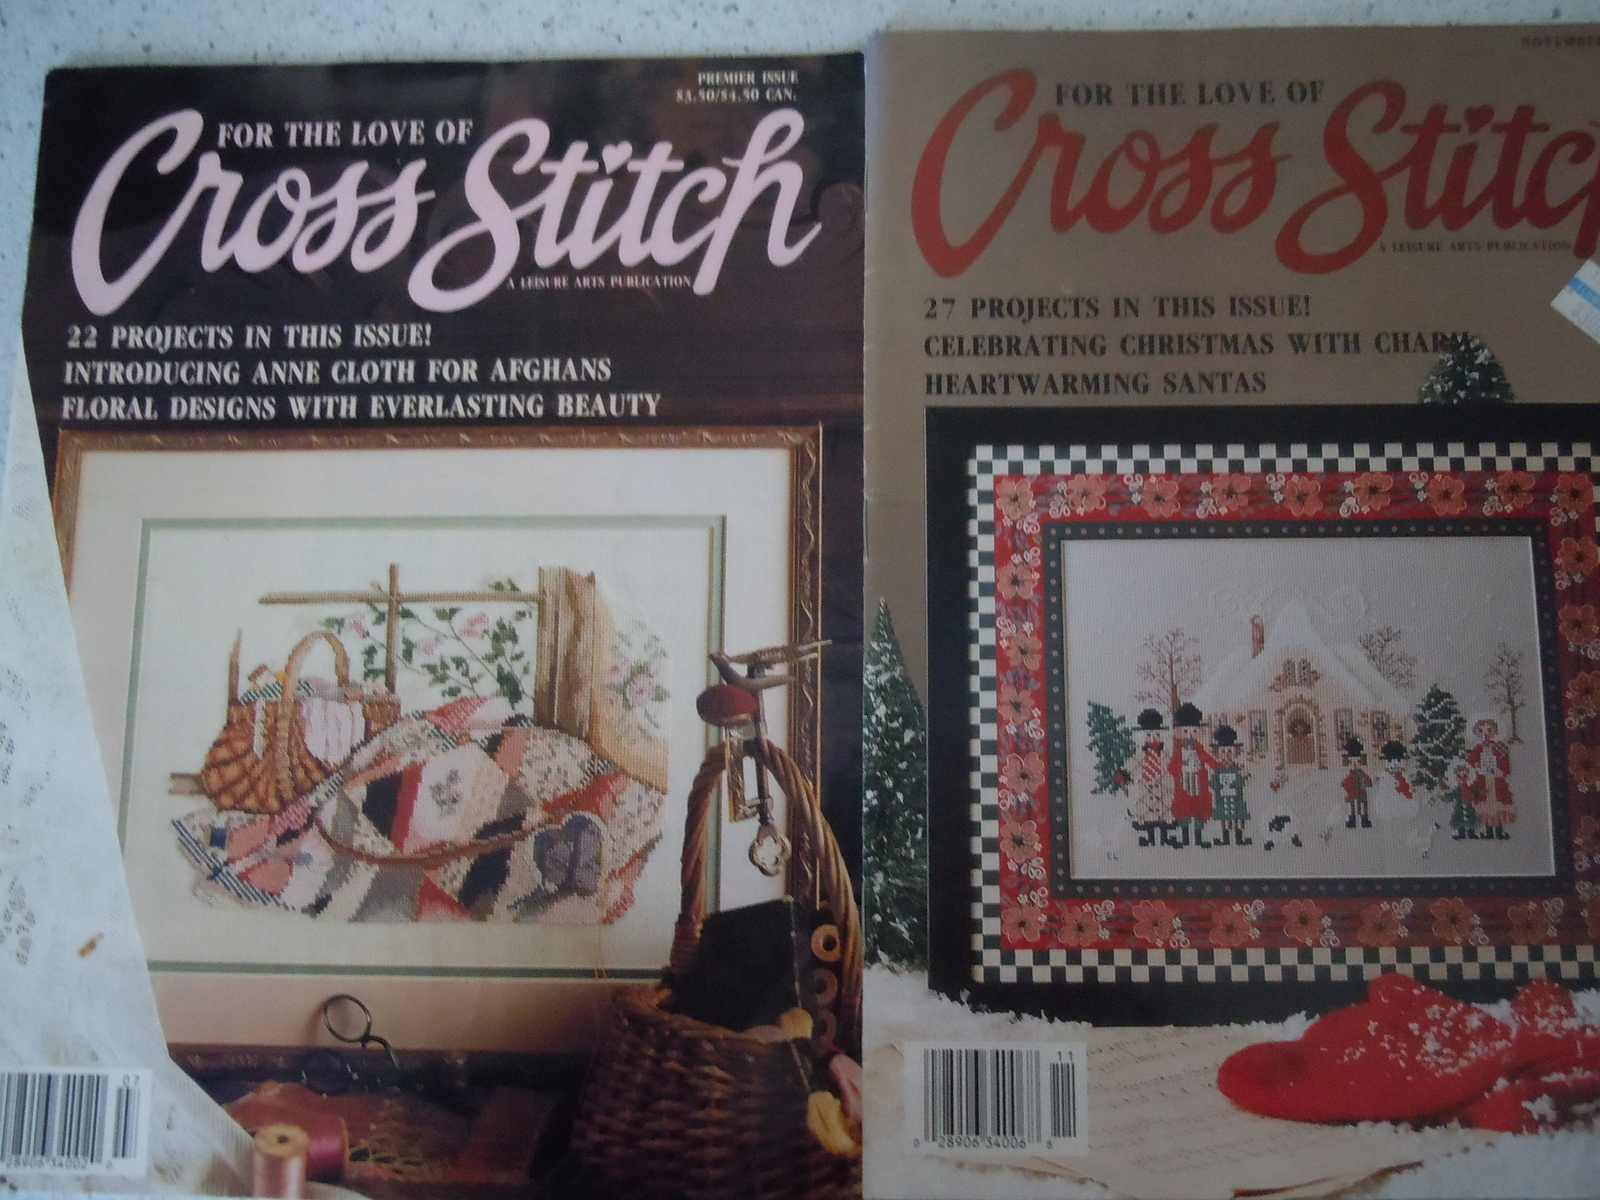 For The Love of Cross Stitch Leisure Arts Magazines Lot of 2 - $4.99